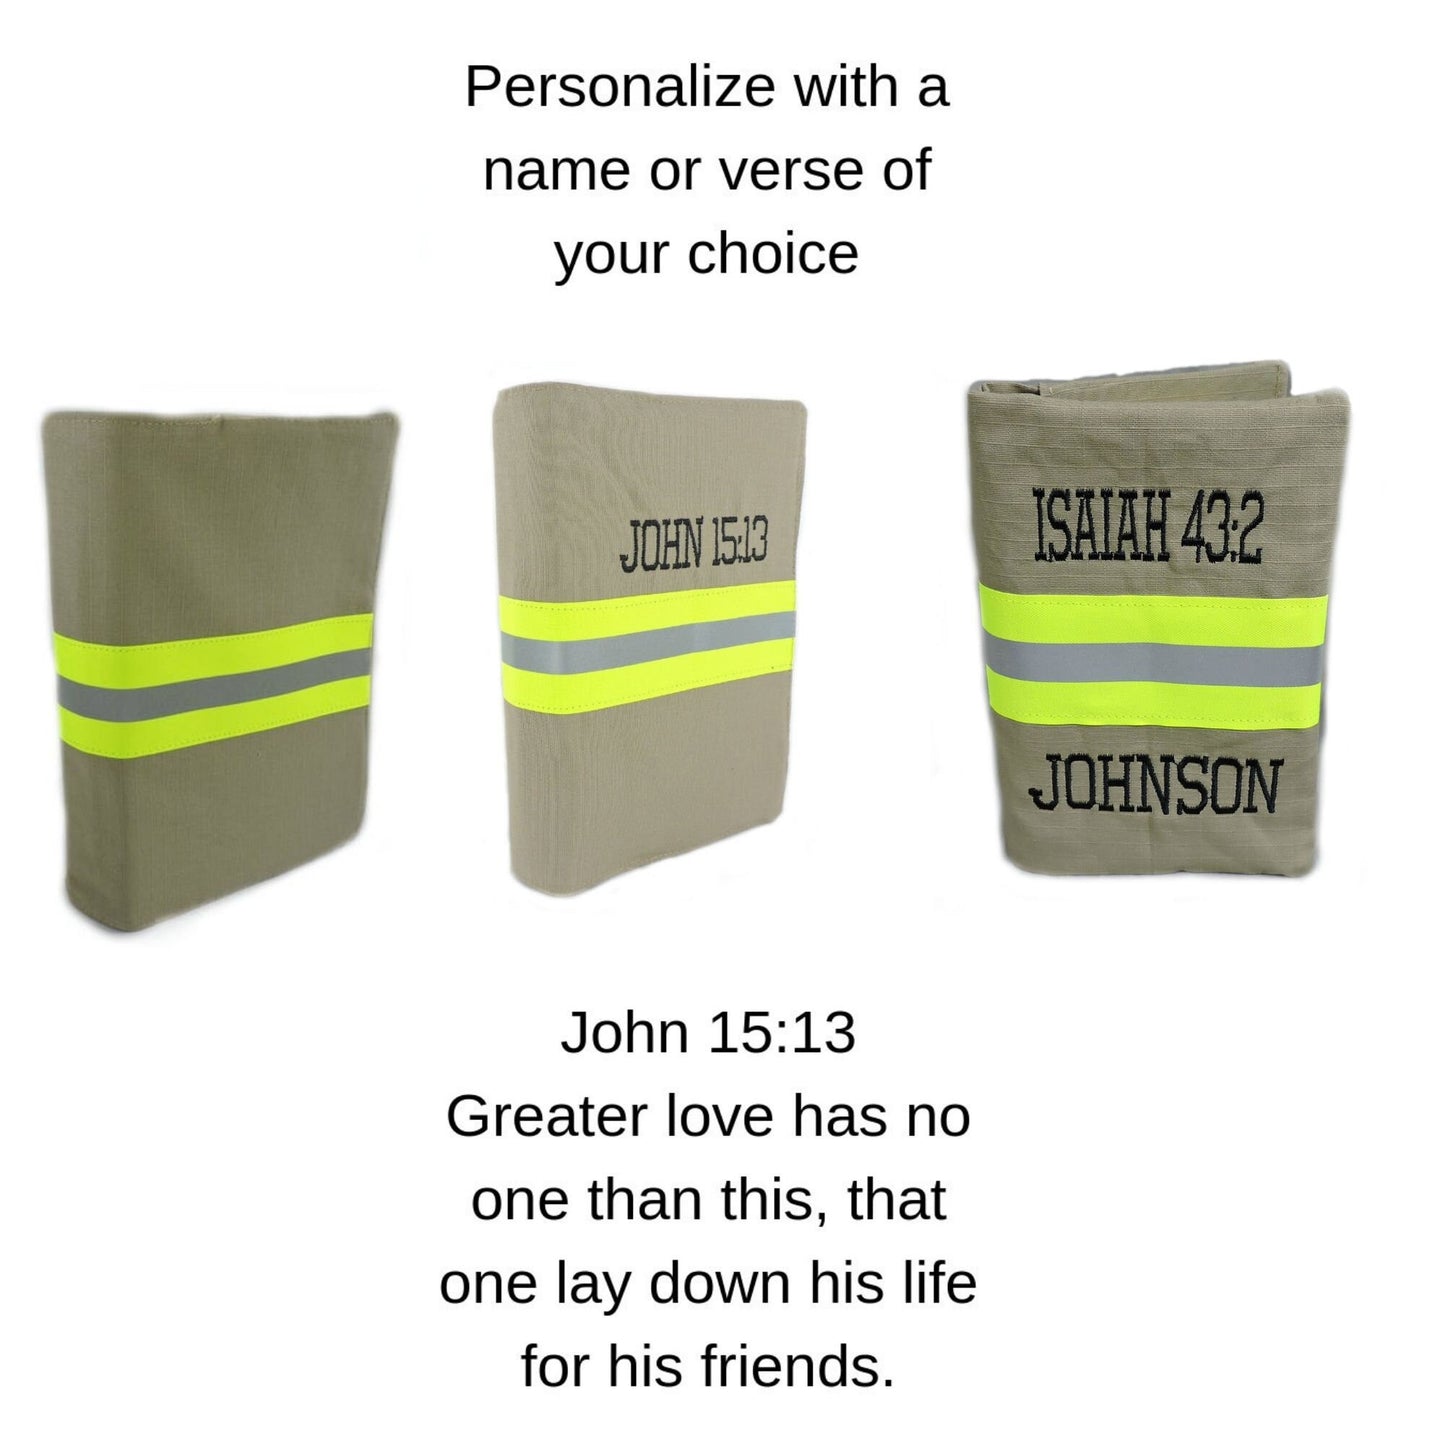 styles of how the bible cover can be personalized